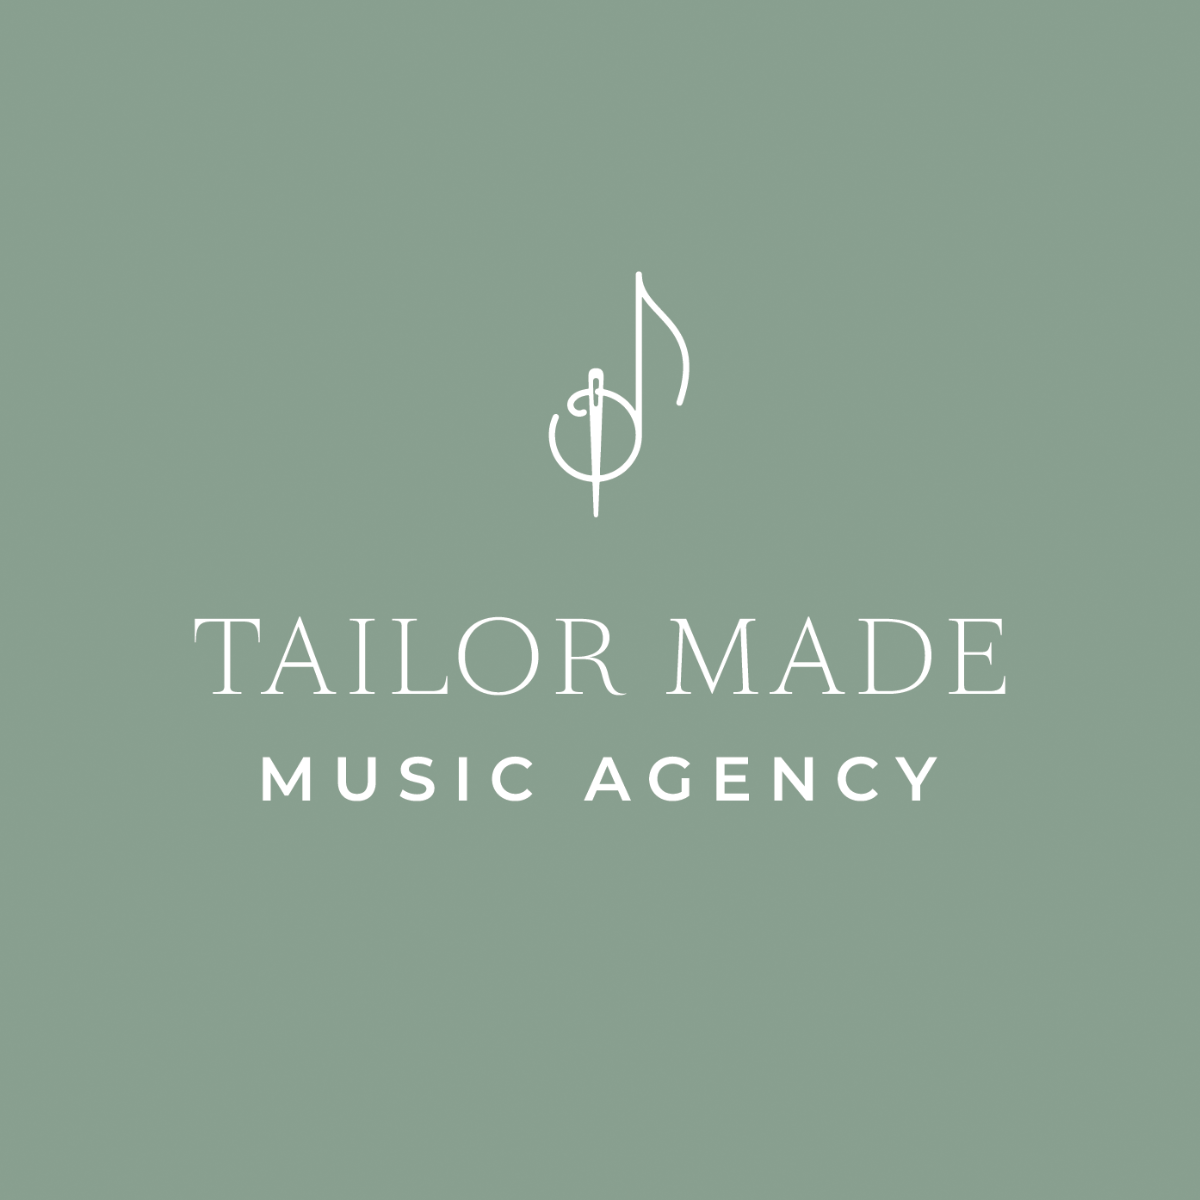 Tailor Made Music Agency-Image-1